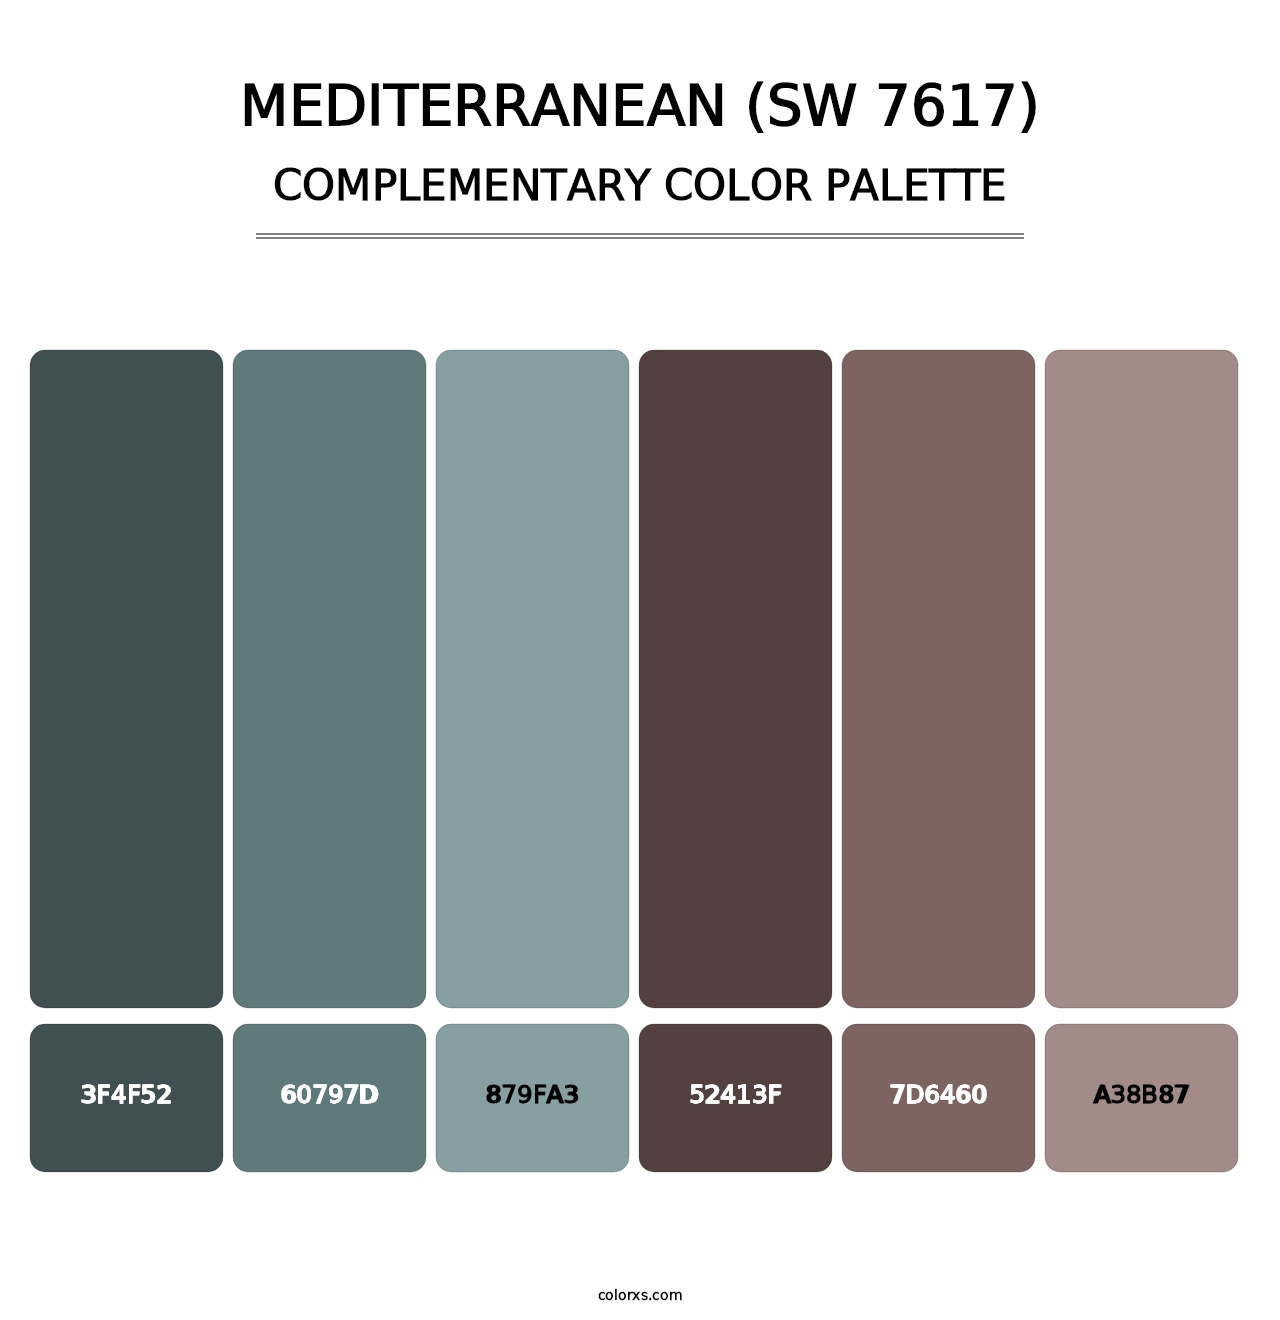 Mediterranean (SW 7617) - Complementary Color Palette